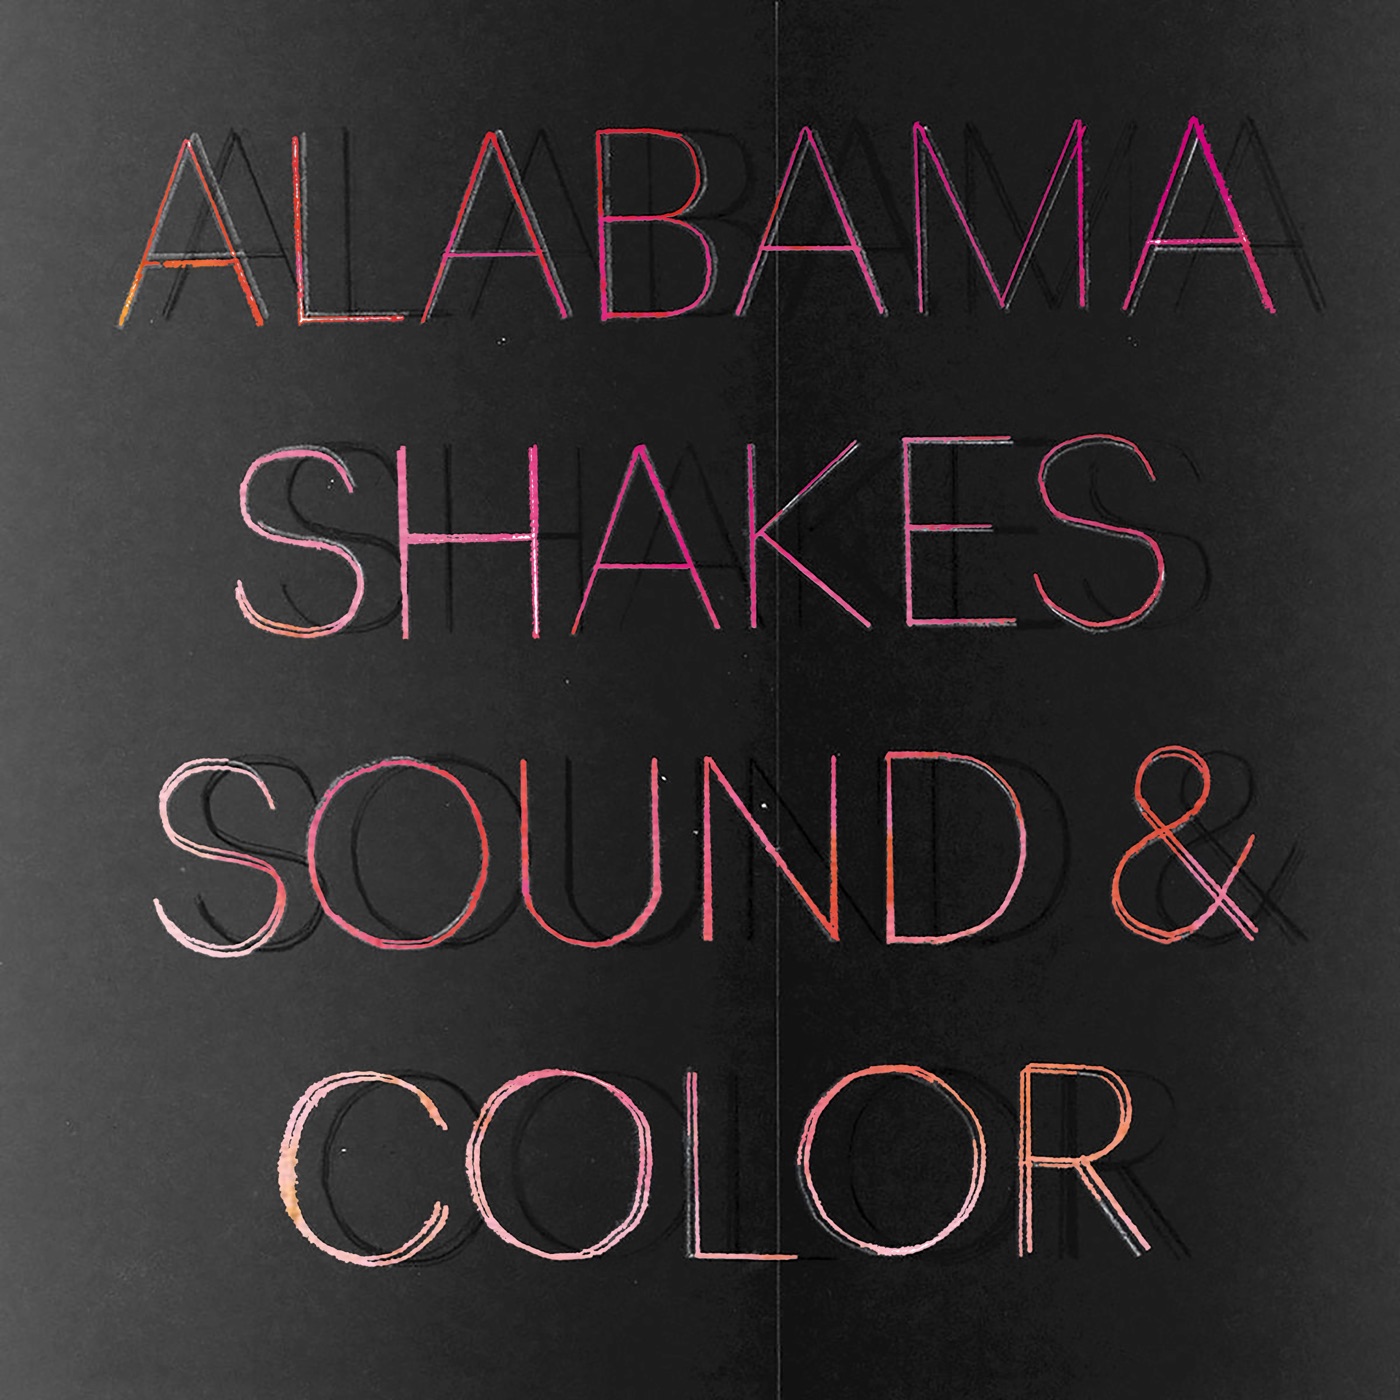 Sound & Color by Alabama Shakes